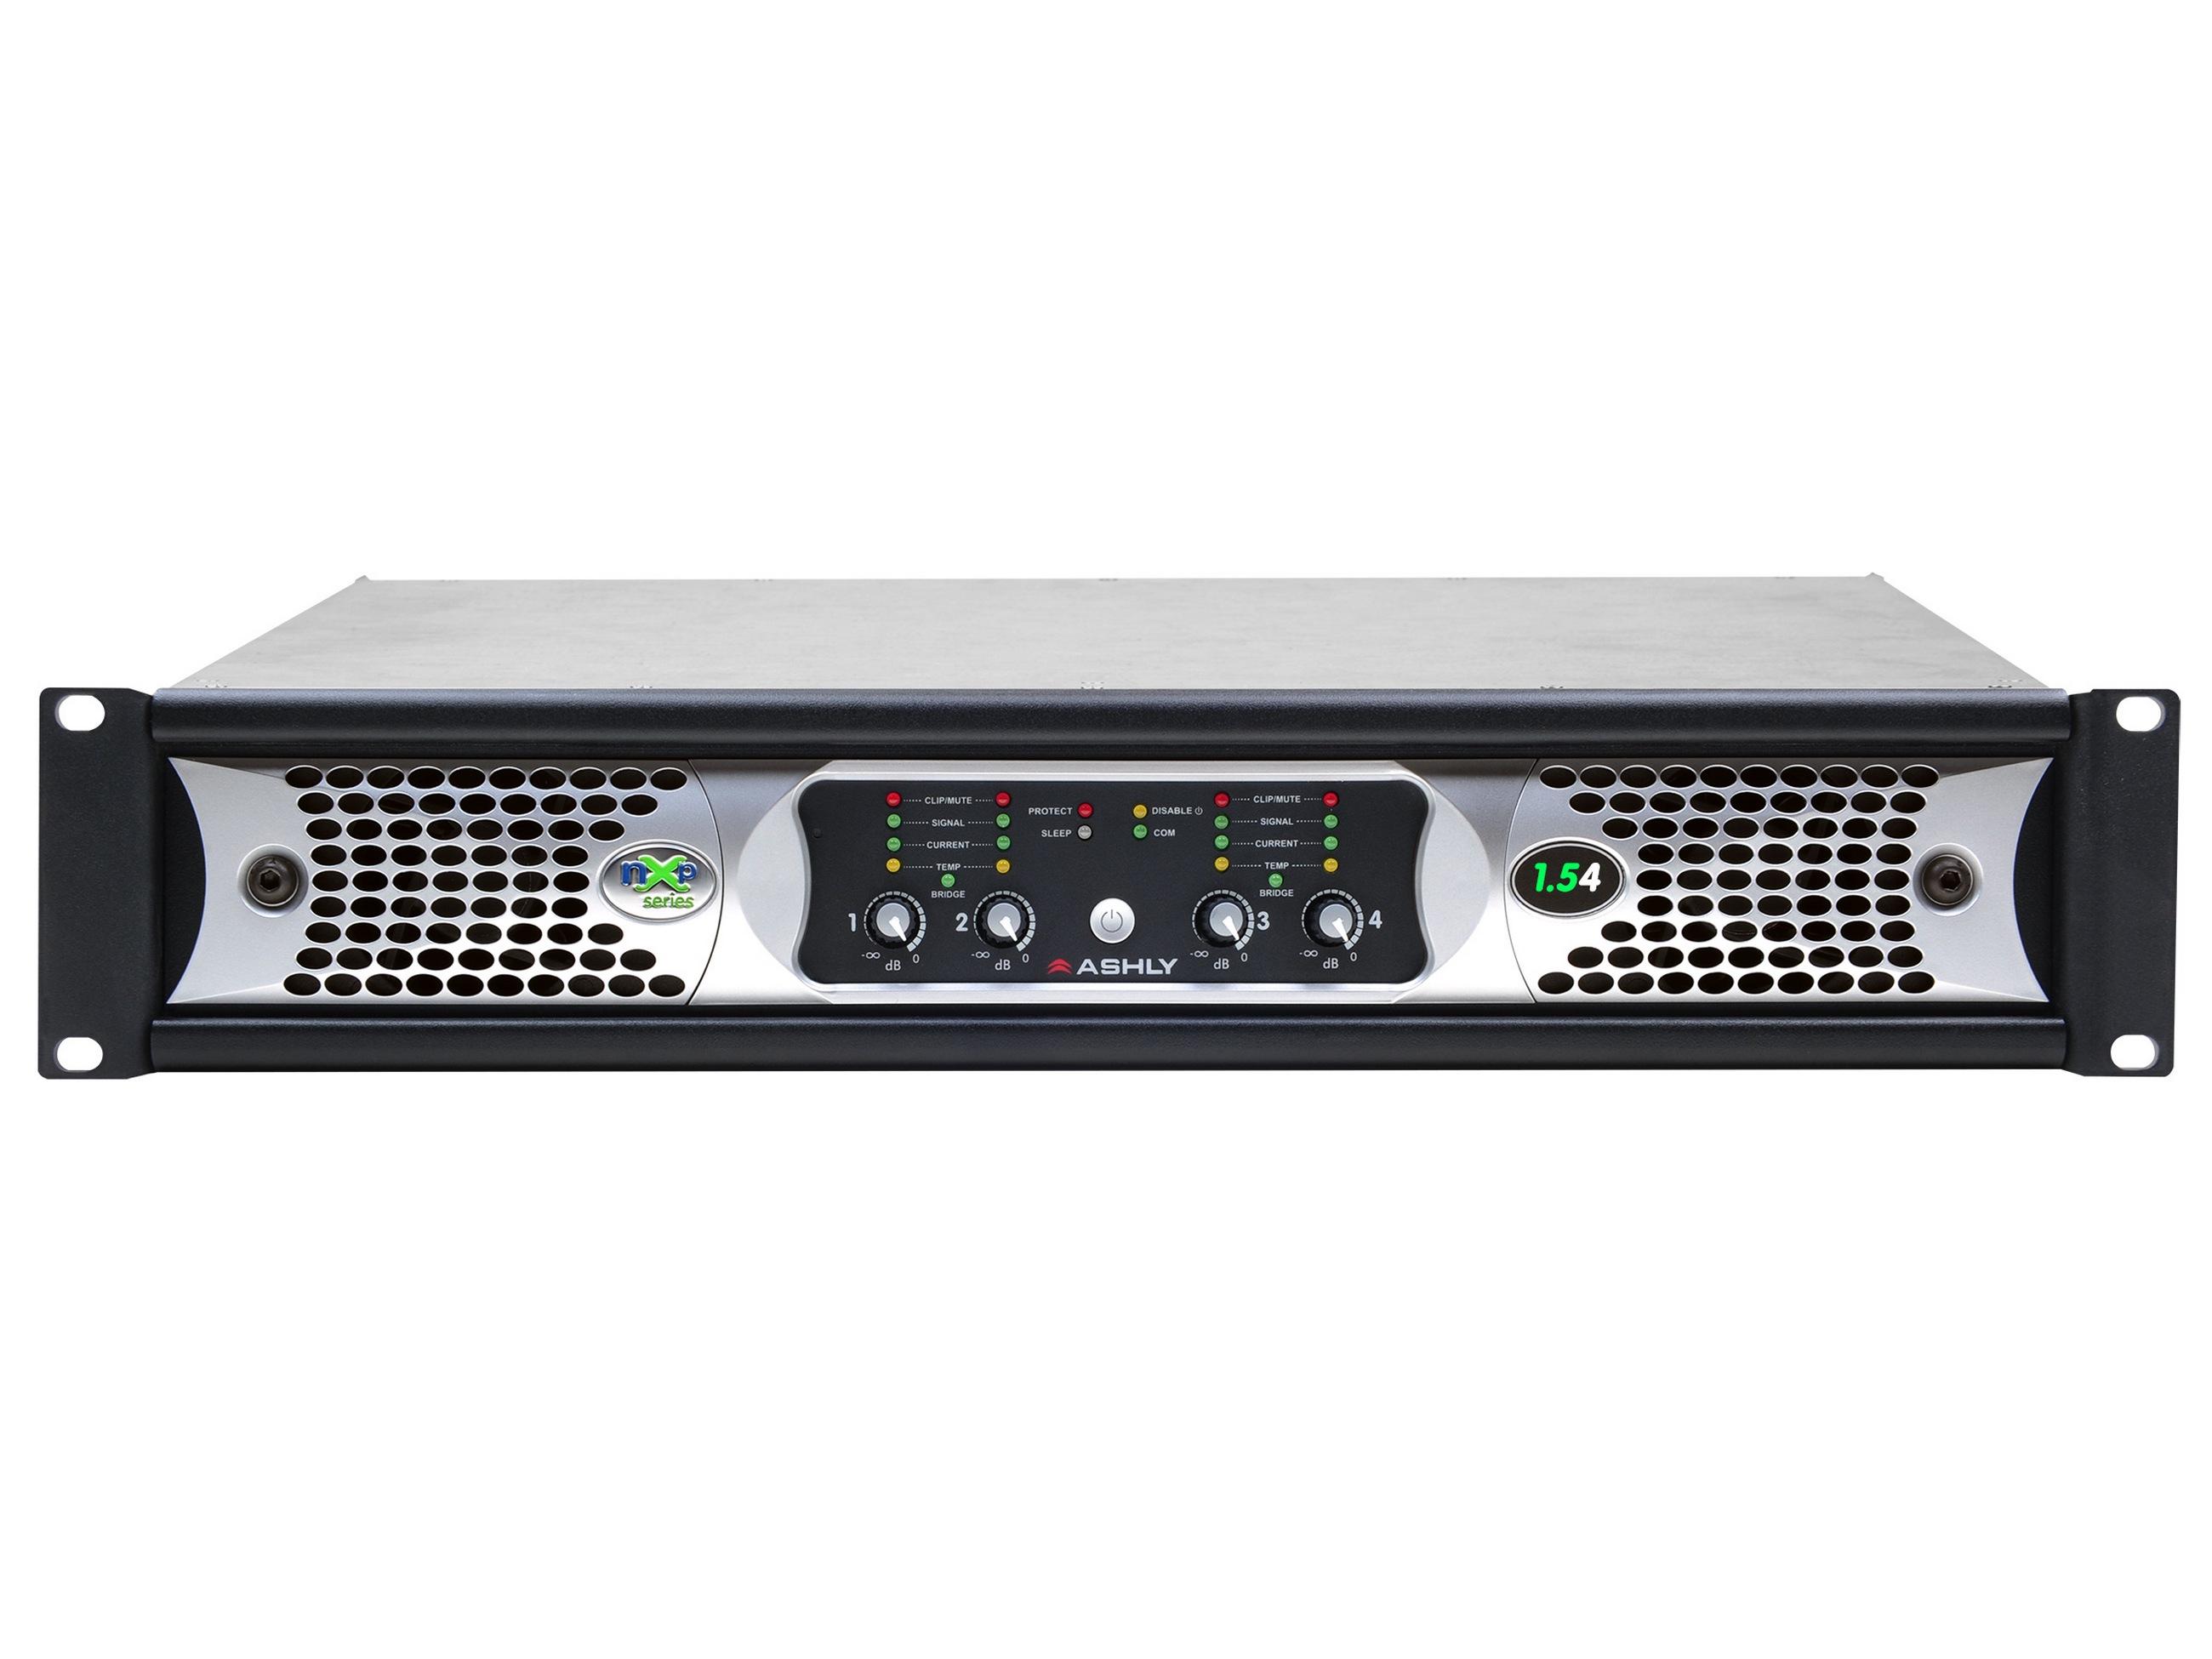 nXp1.54 Network Power Amplifier 4 x 1500 Watts/2 Ohms with Protea DSP by Ashly